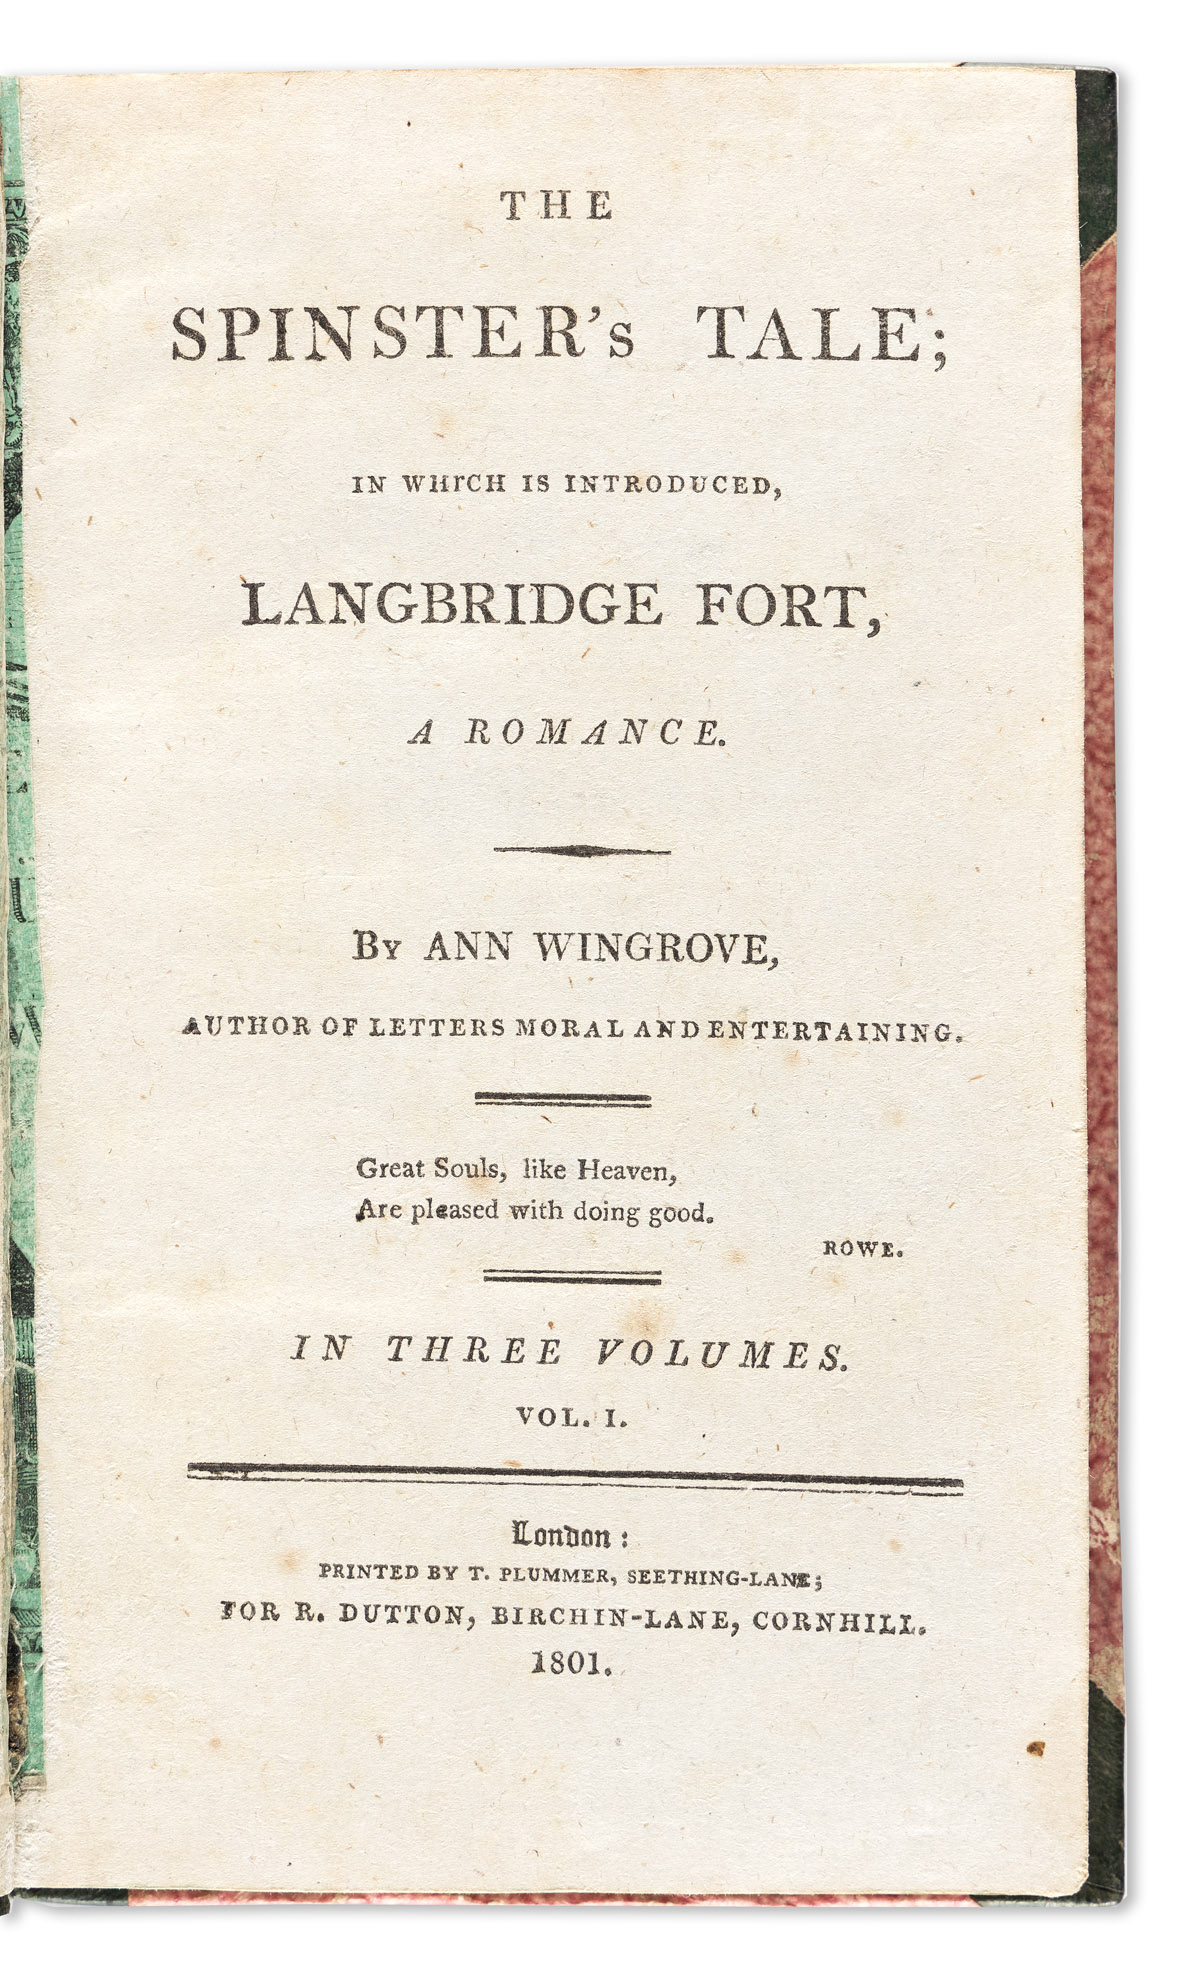 Wingrove, Ann (fl. circa 1800) The Spinsters Tale; in which is Introduced, Langbridge Fort, a Romance.